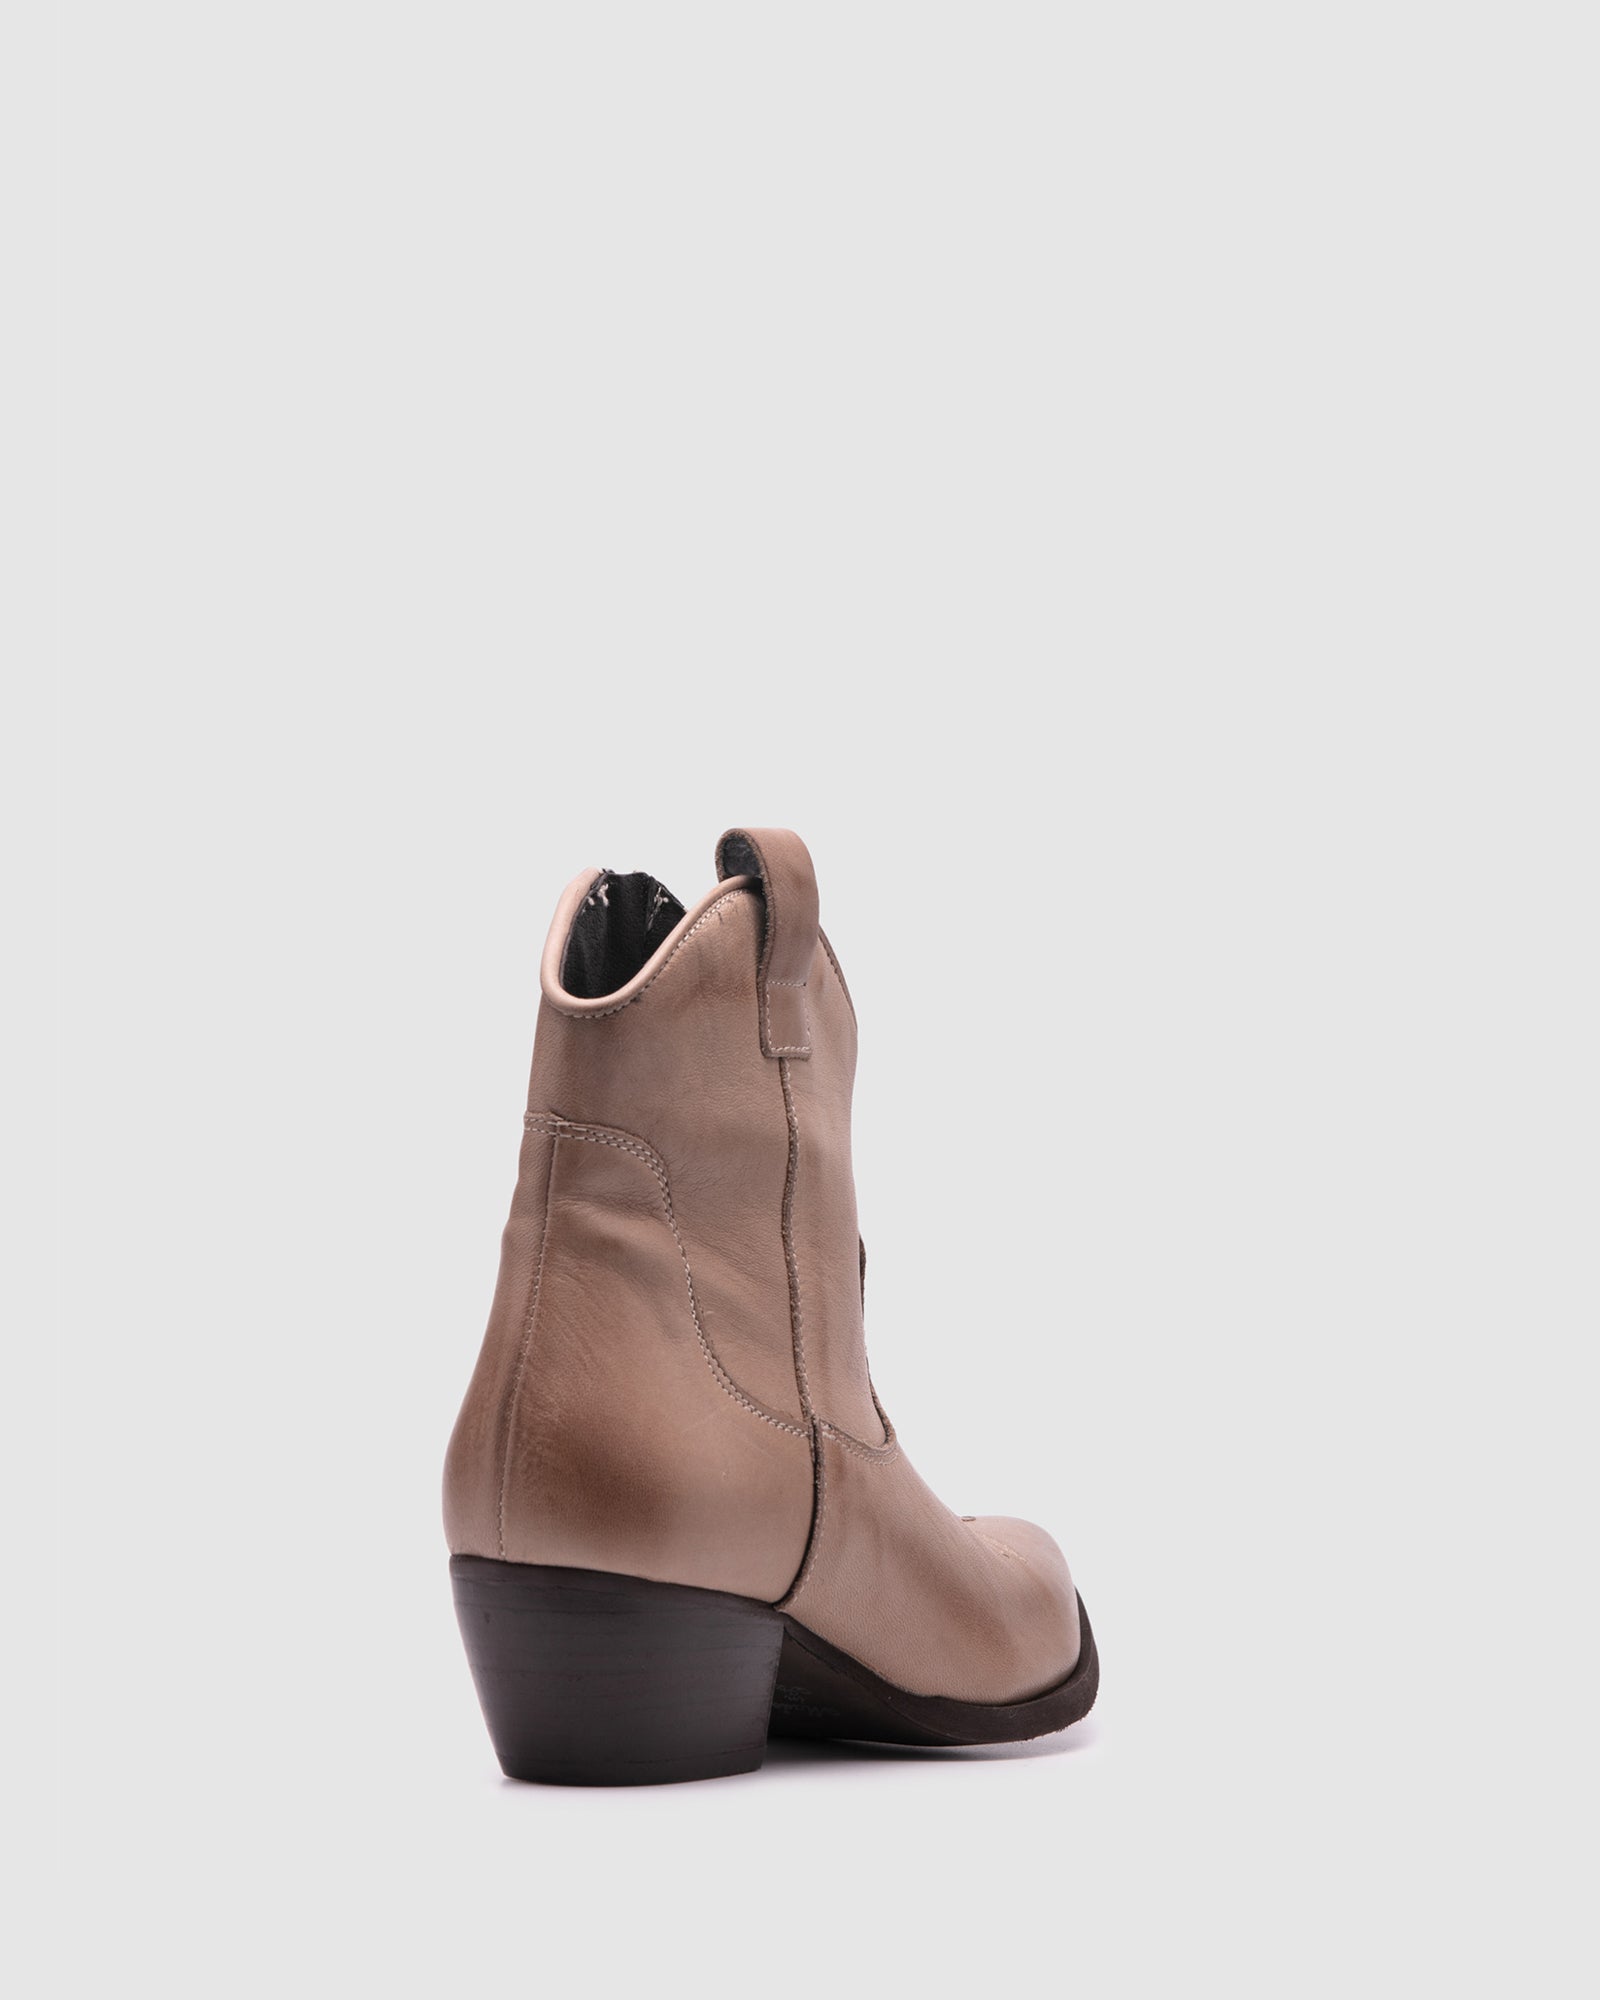 mainland boot - taupe